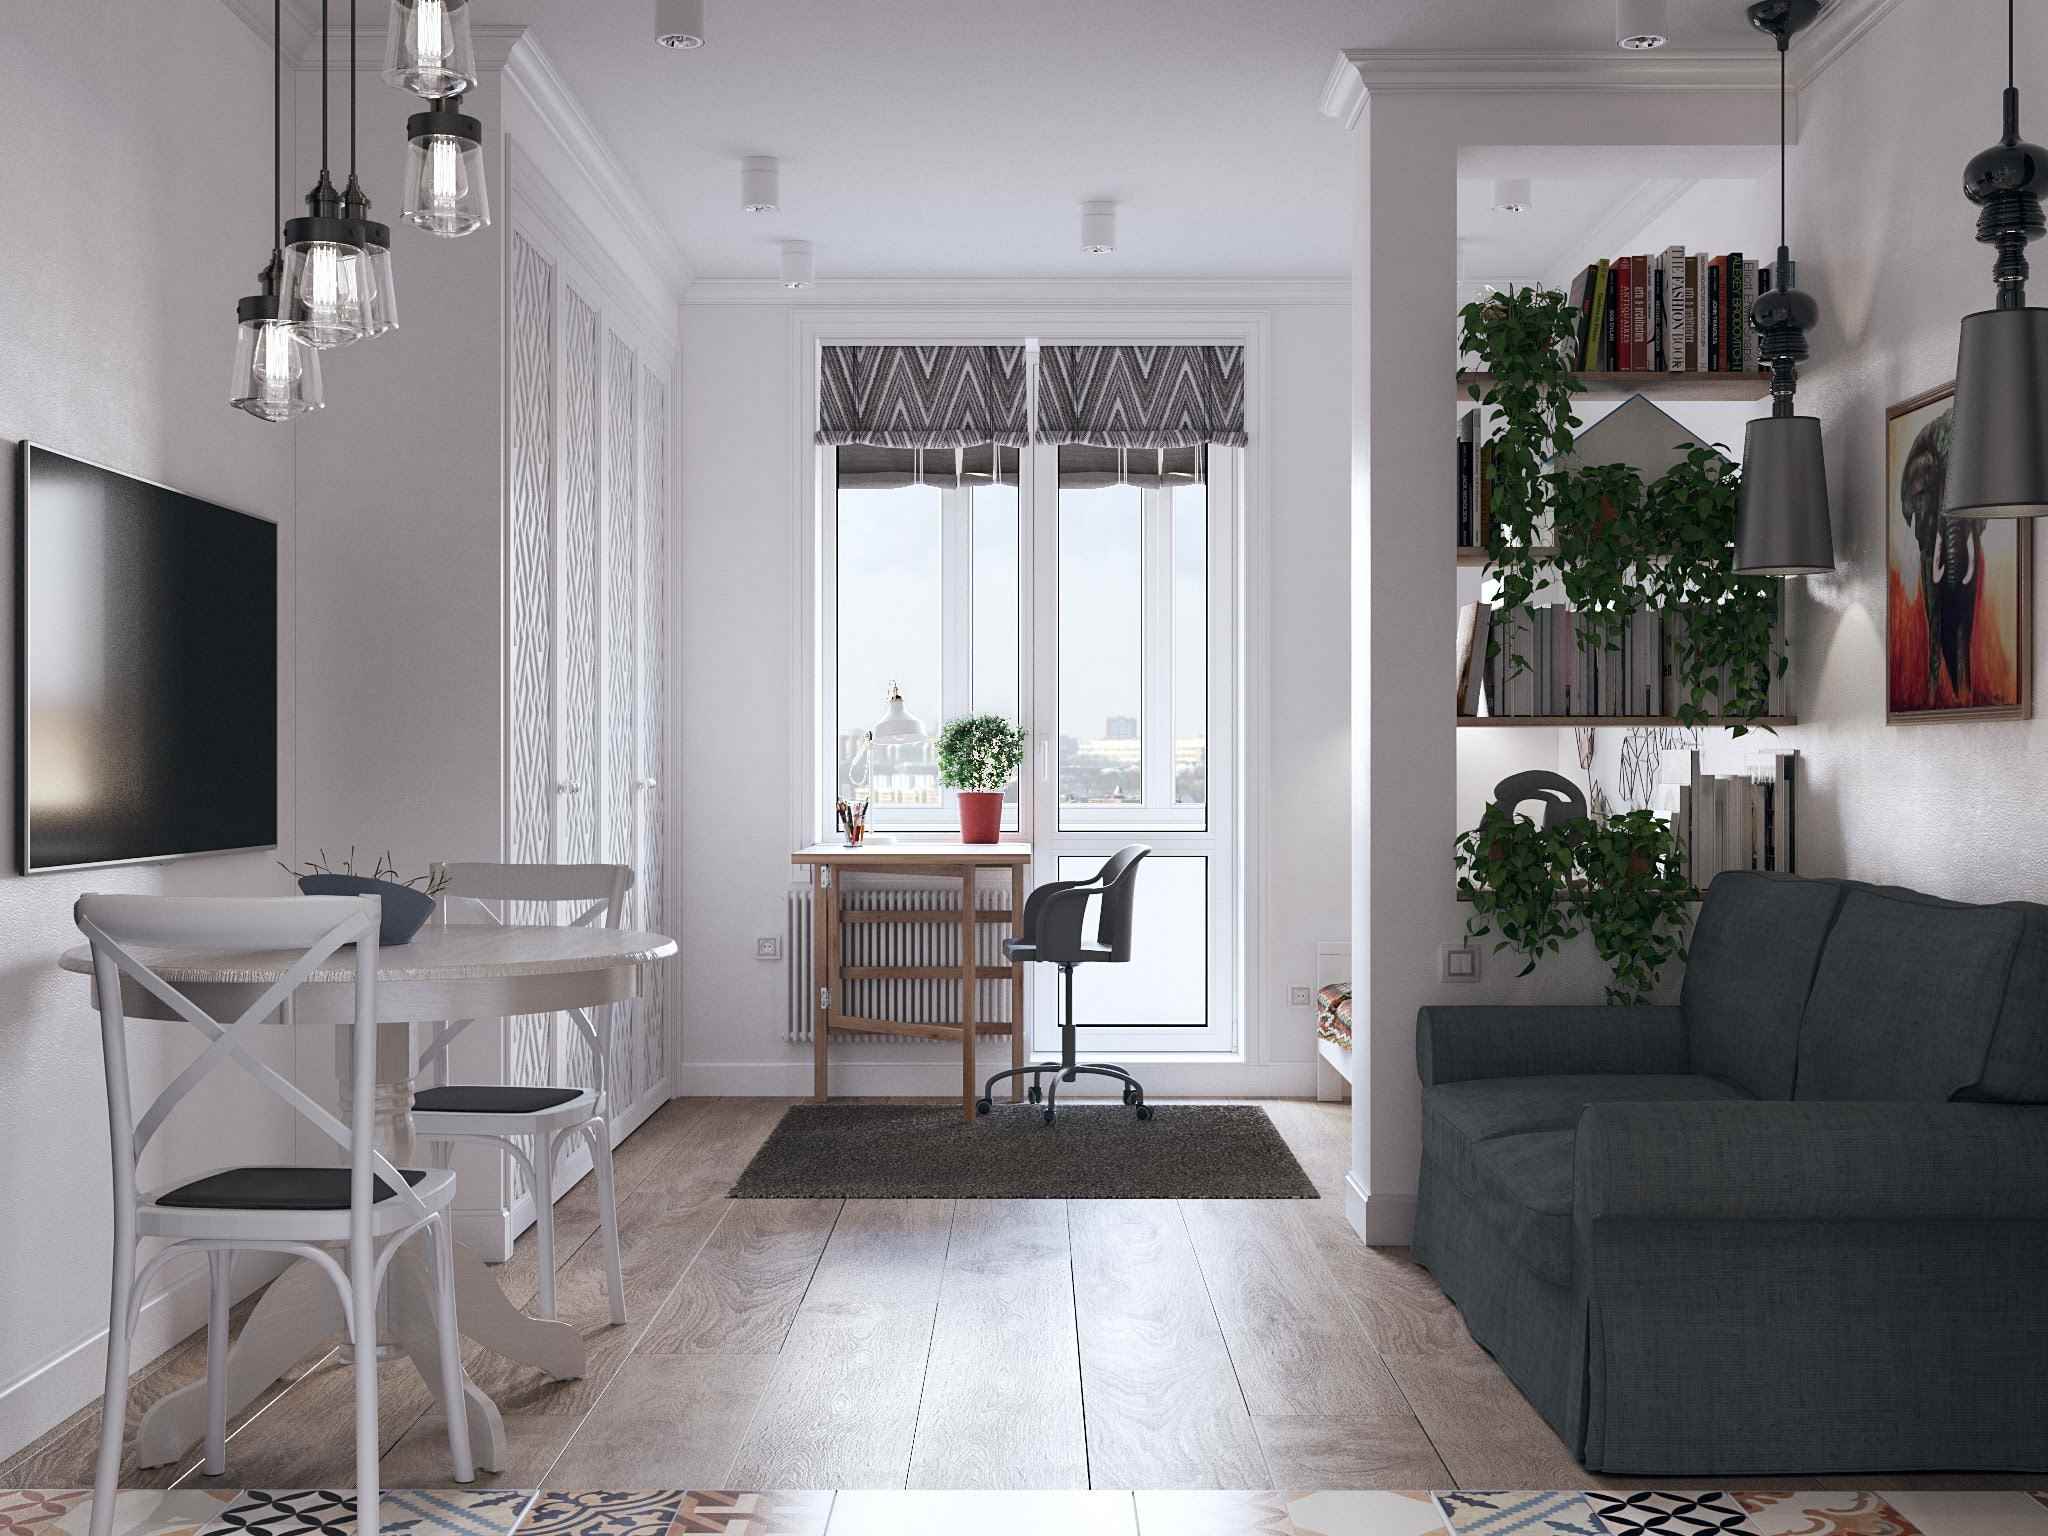 An example of a beautiful studio apartment decor of 26 square meters